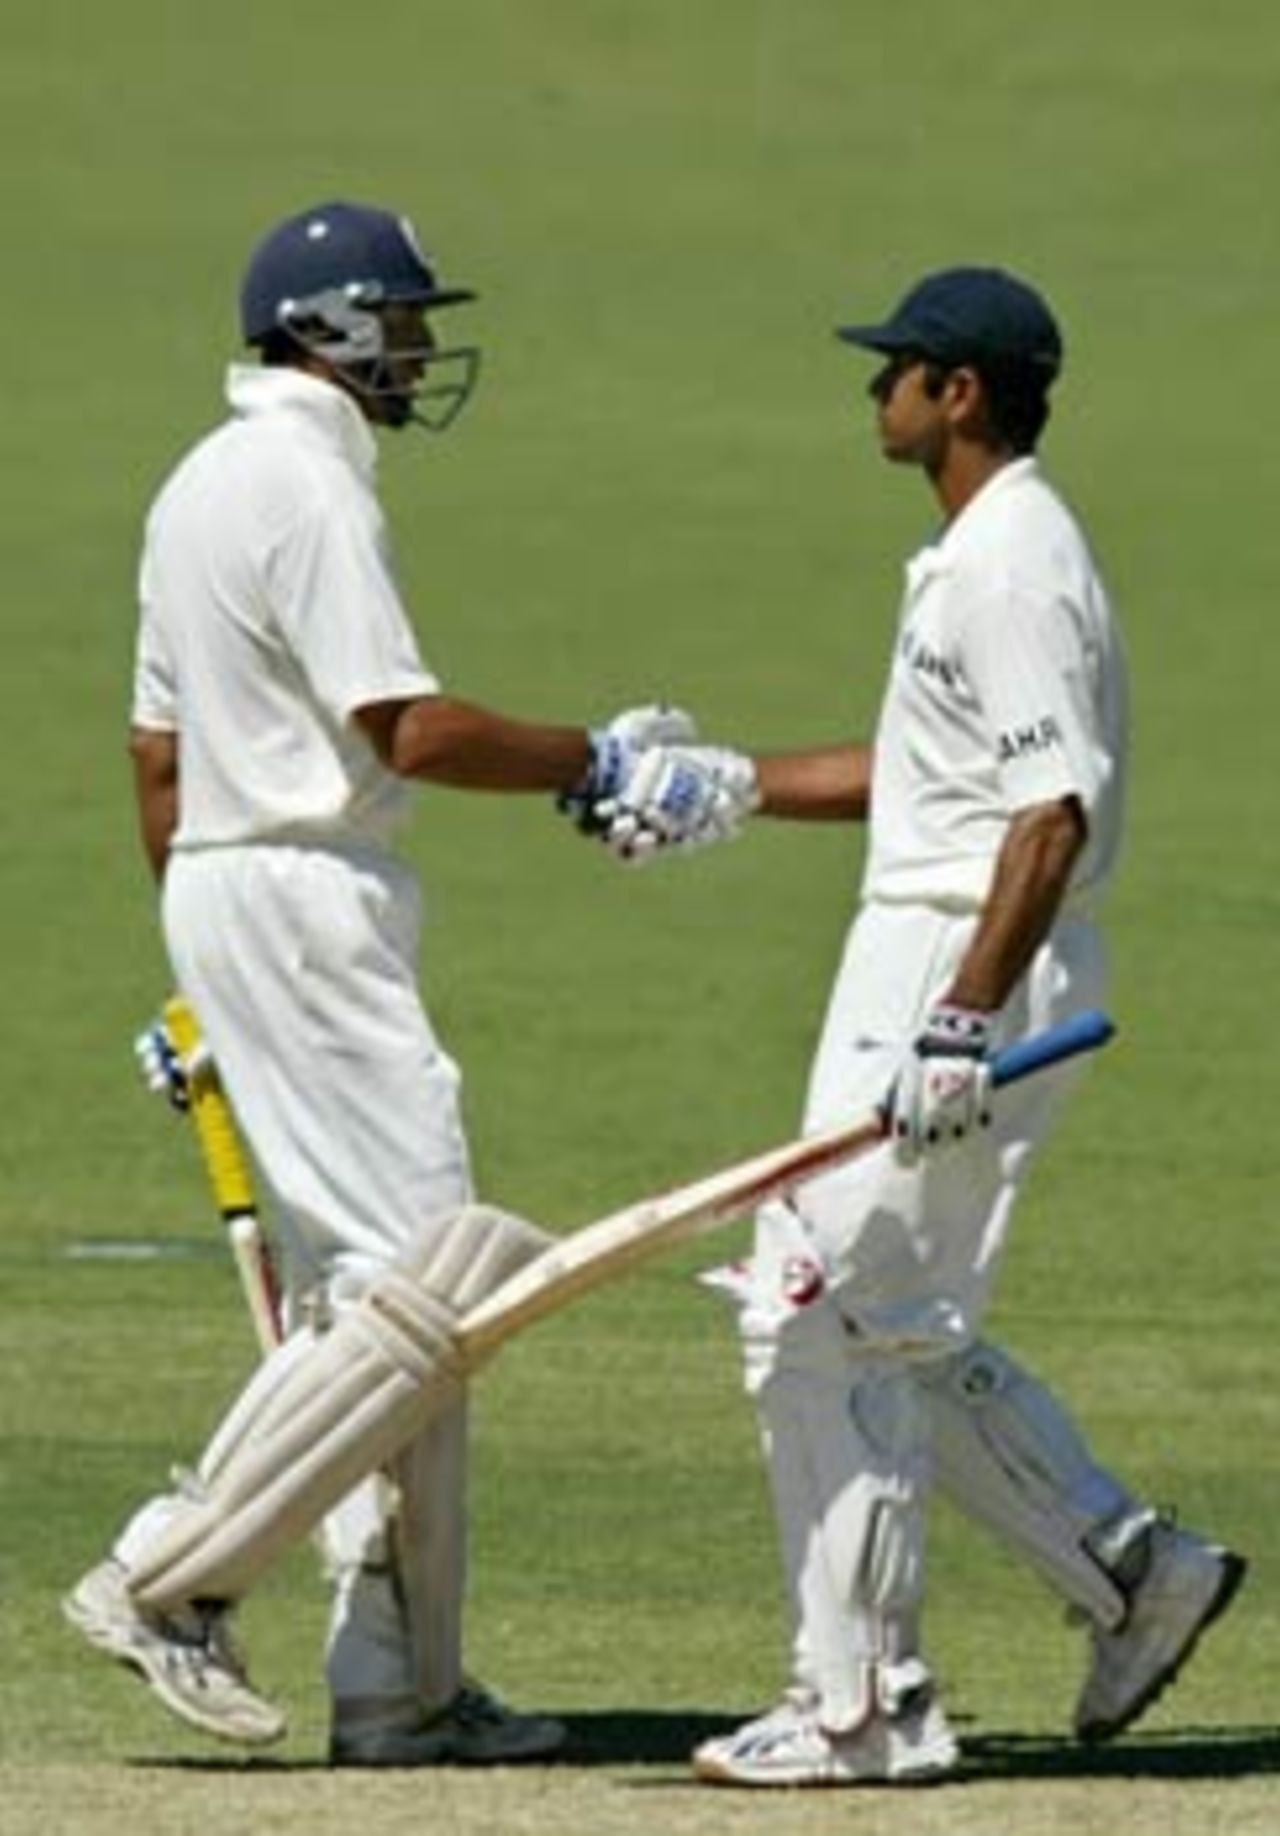 The quiet congratulations tell you how well Laxman and Dravid know each other, Australia v India, 2nd Test, Adelaide, 3rd day, December 14, 2003